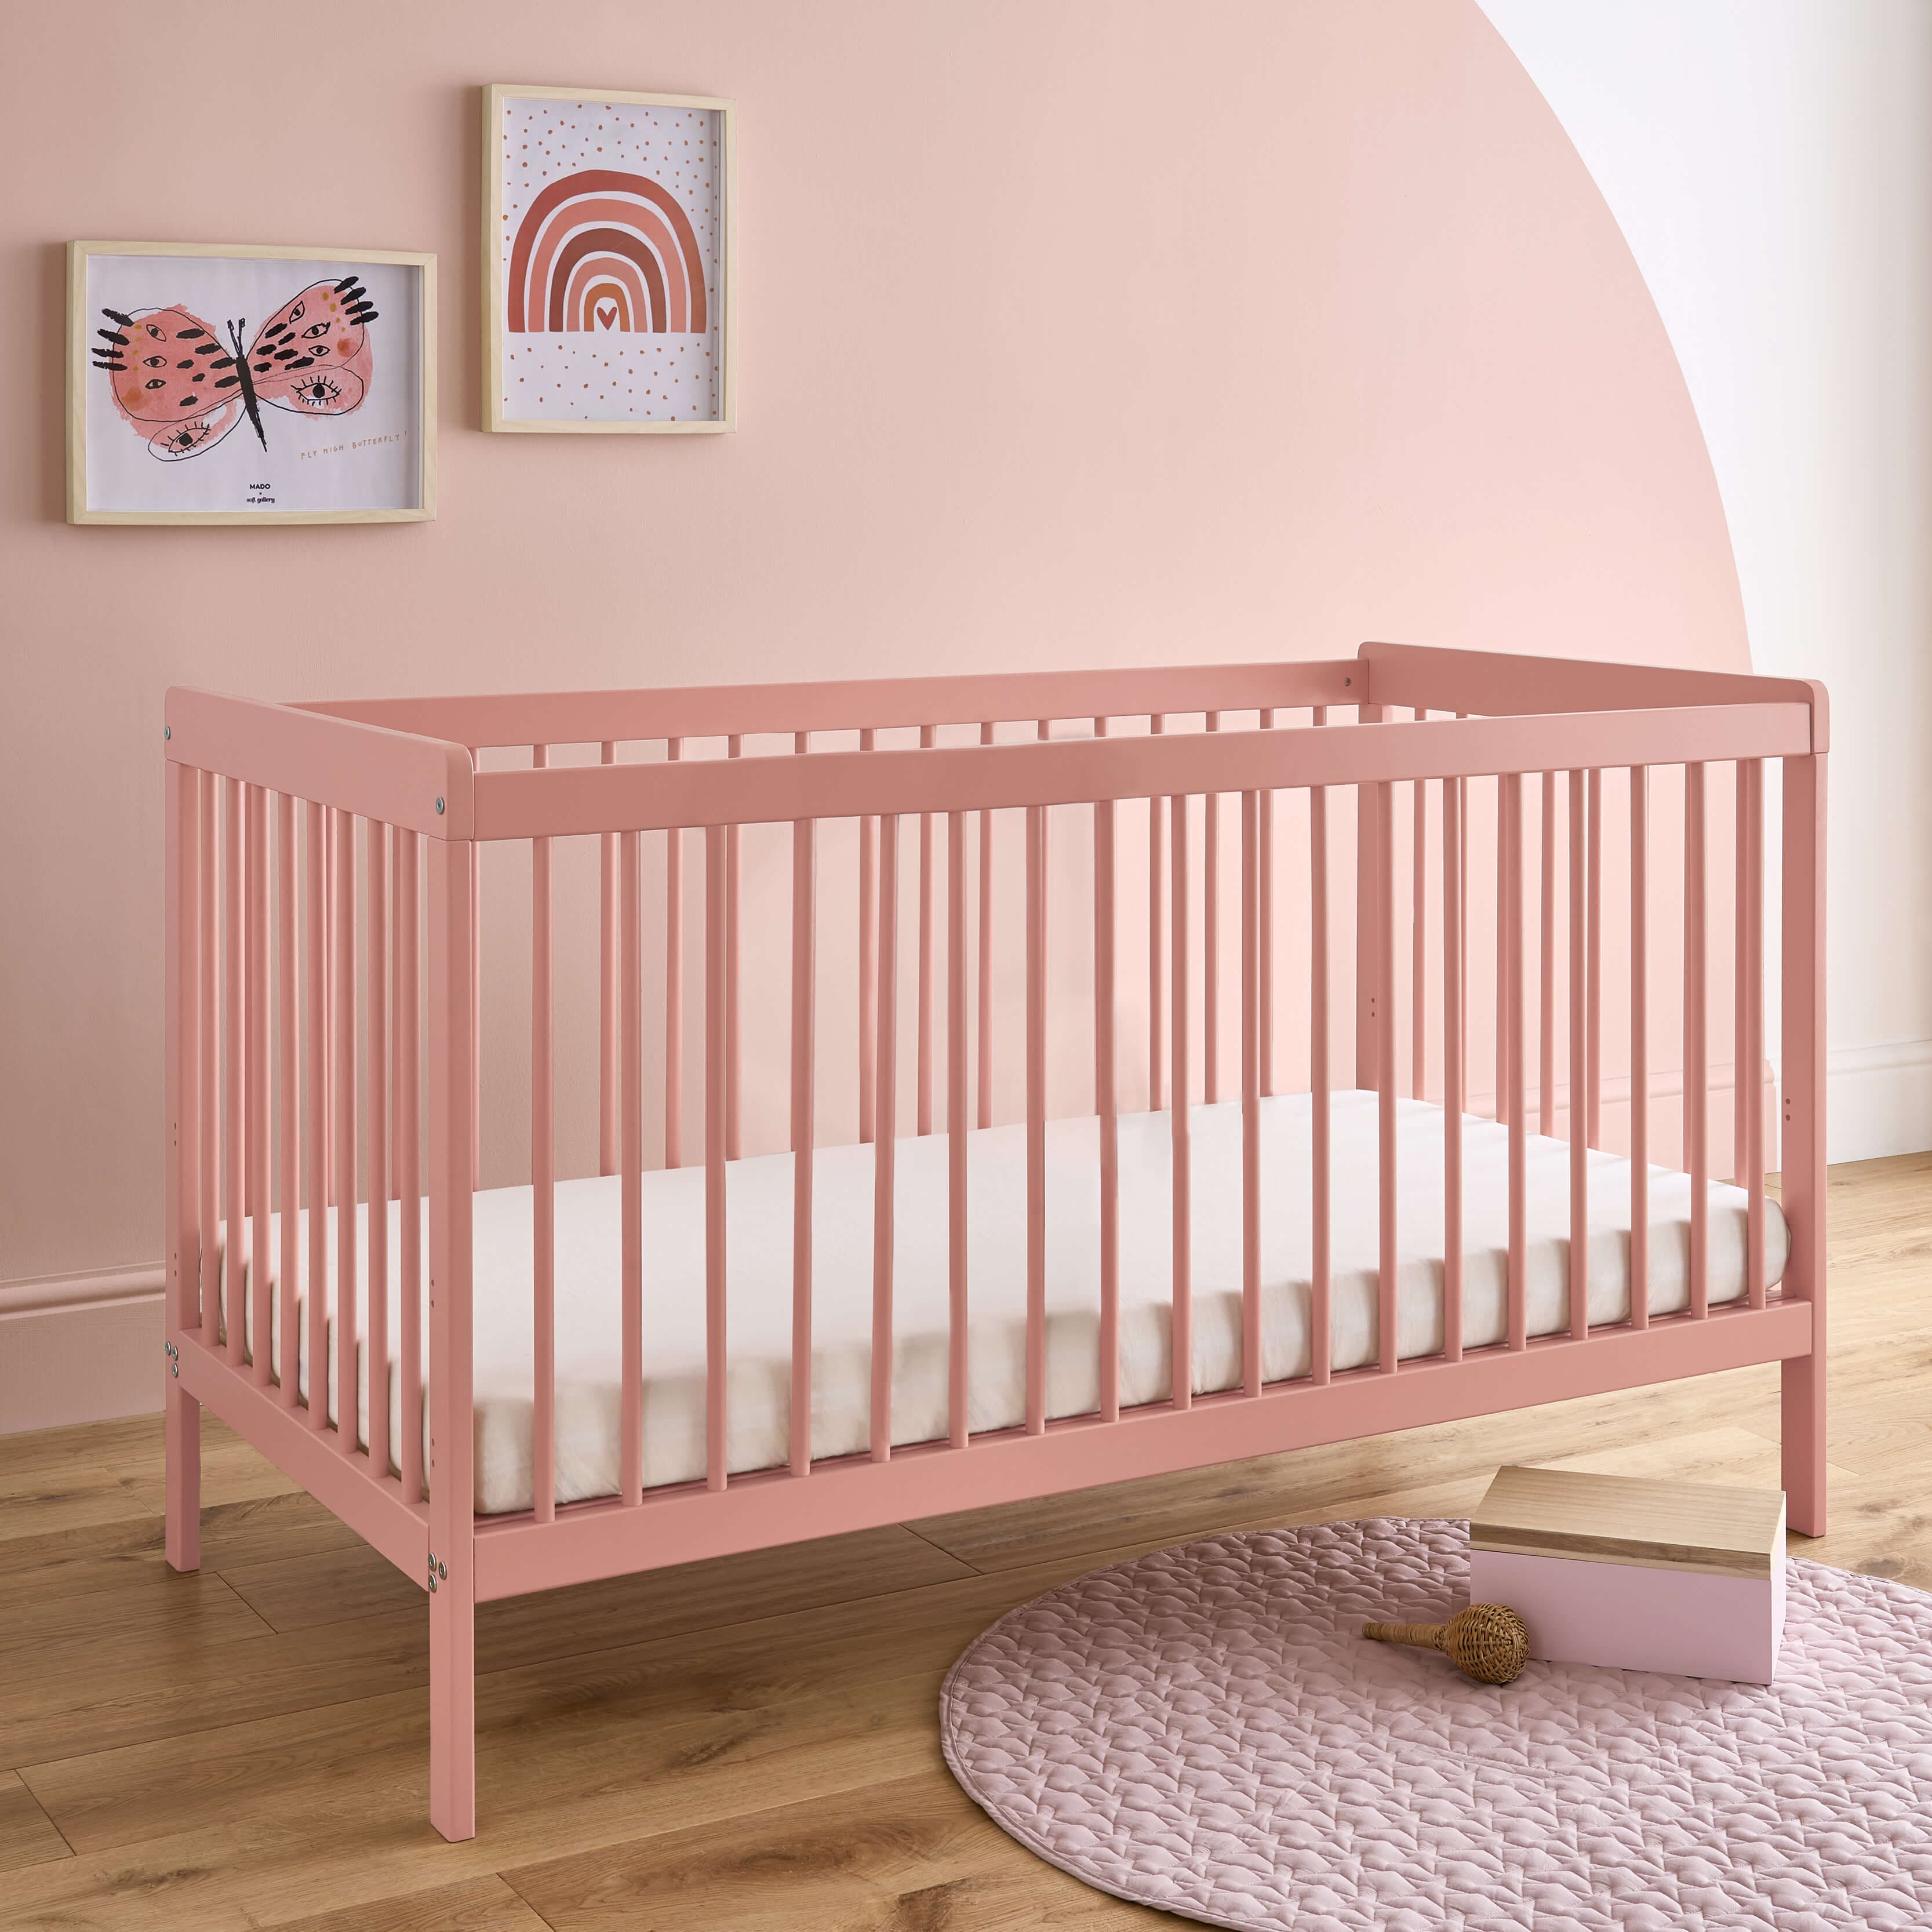 CuddleCo Nola Cot Bed in Soft Blush Cot Beds